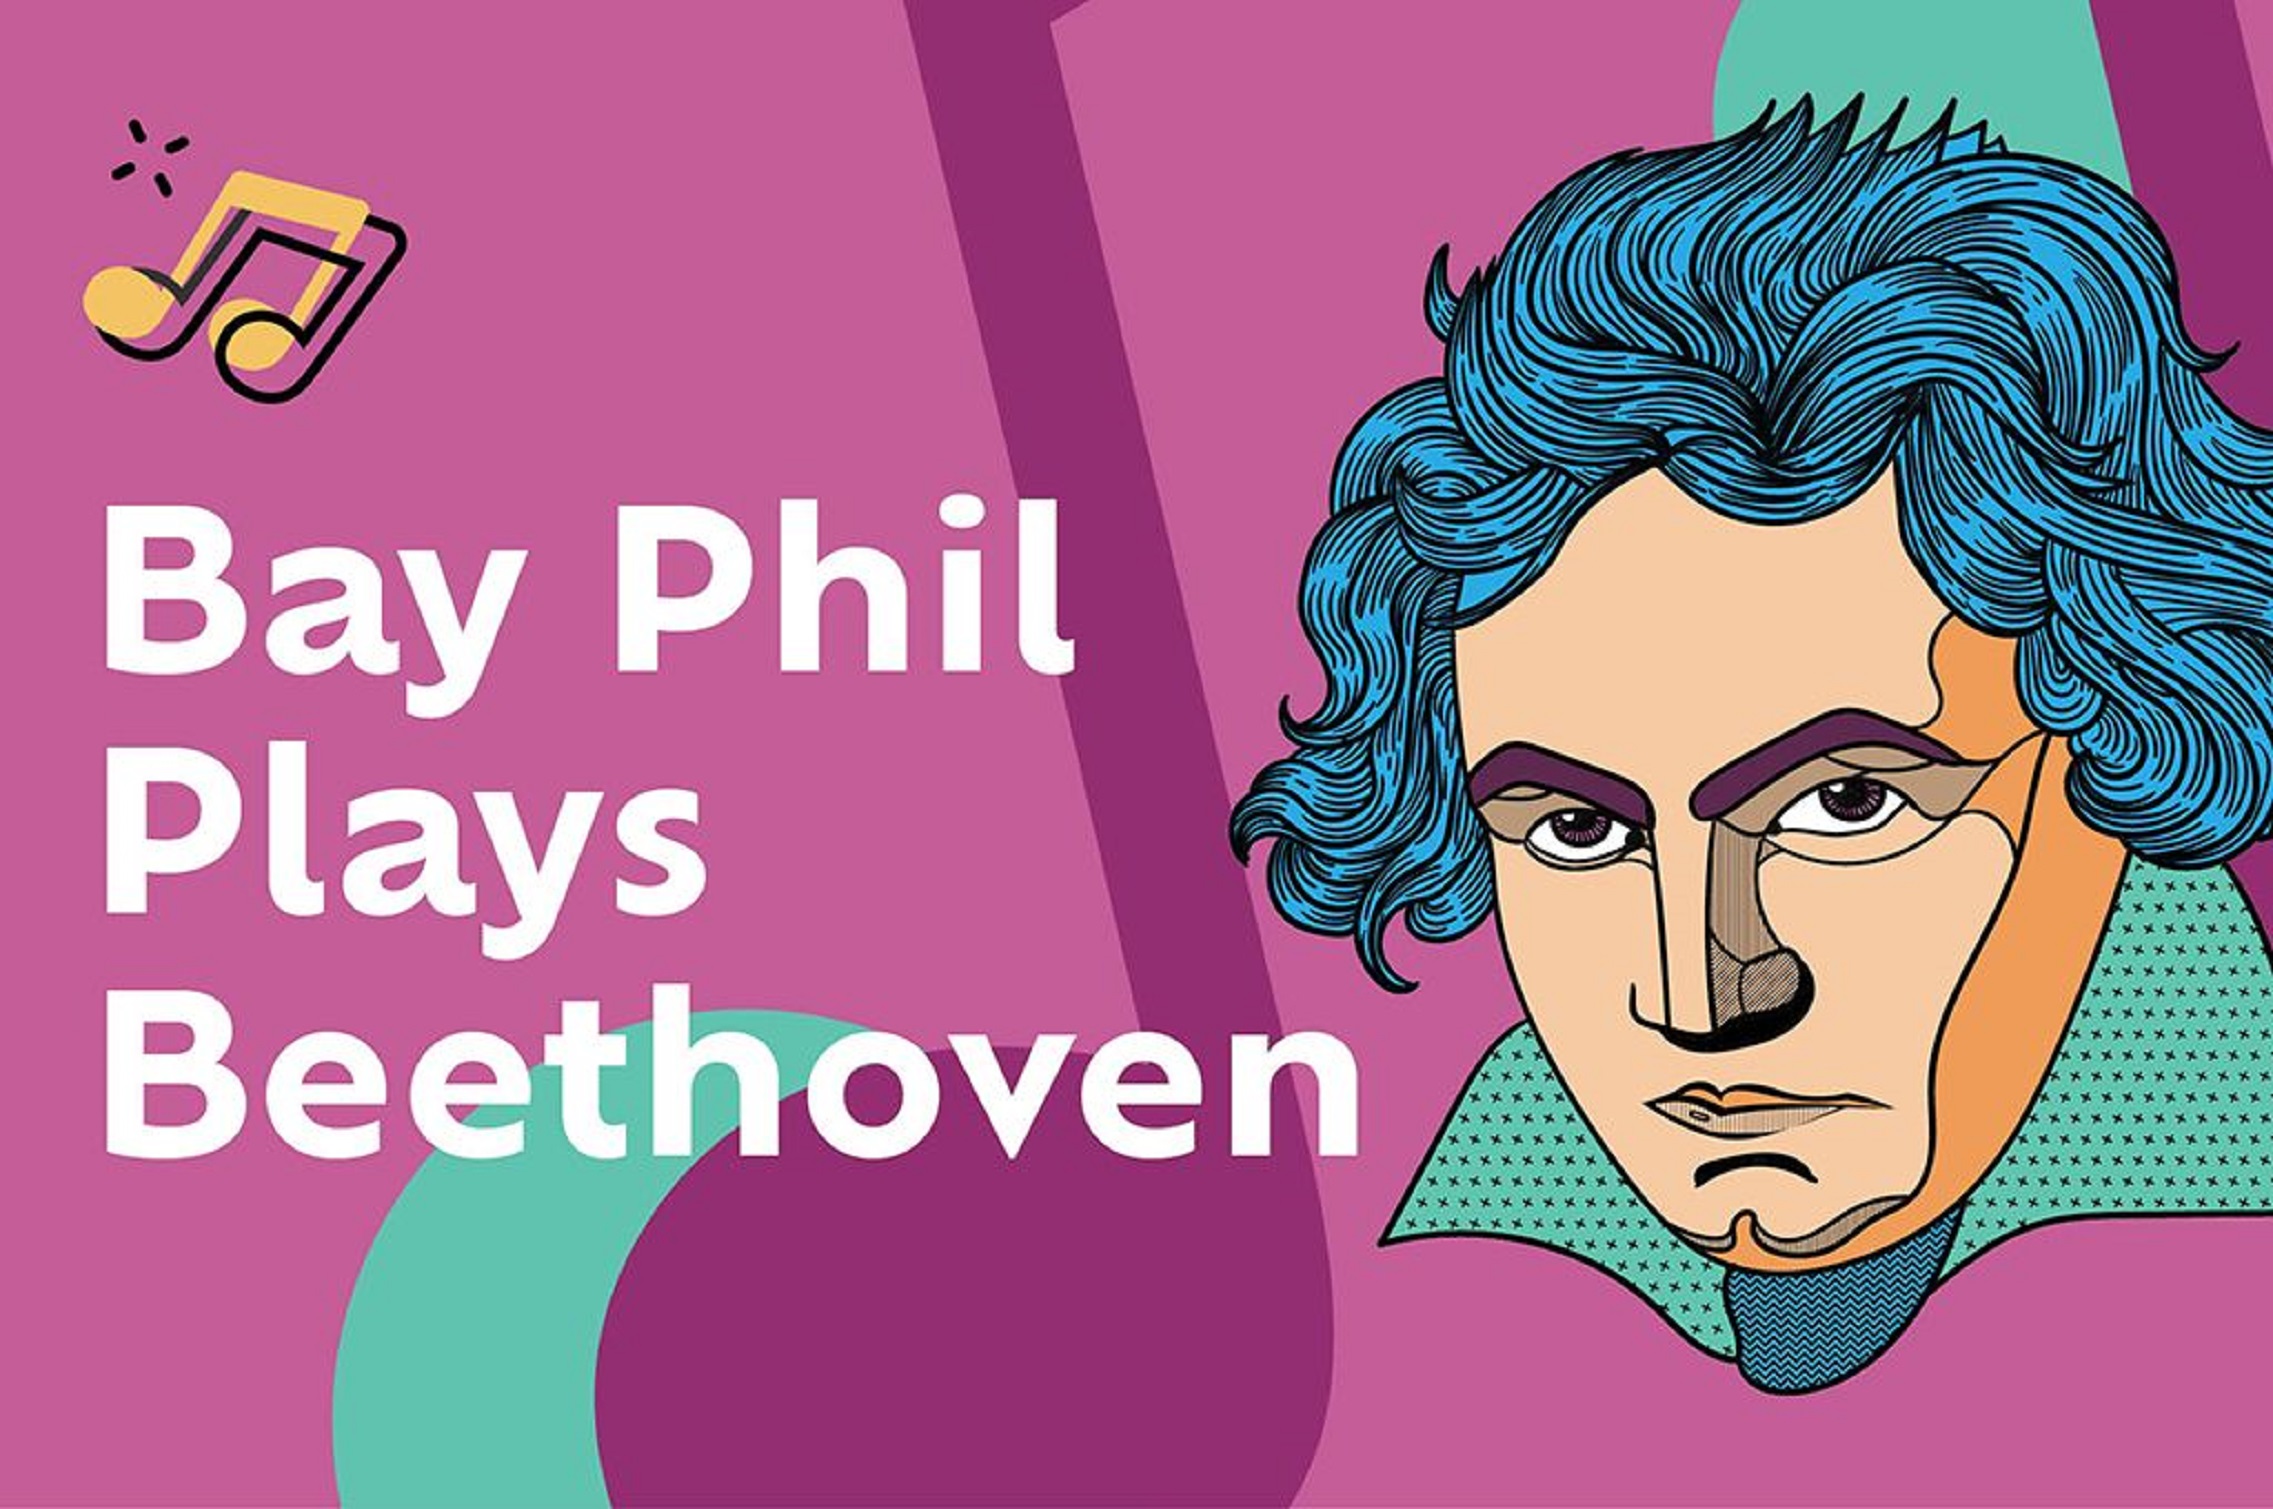 Bay Philharmonic Plays Beethoven with Guest Artist, Pianist Charlie Albright and Conductor Jung-Ho Pak